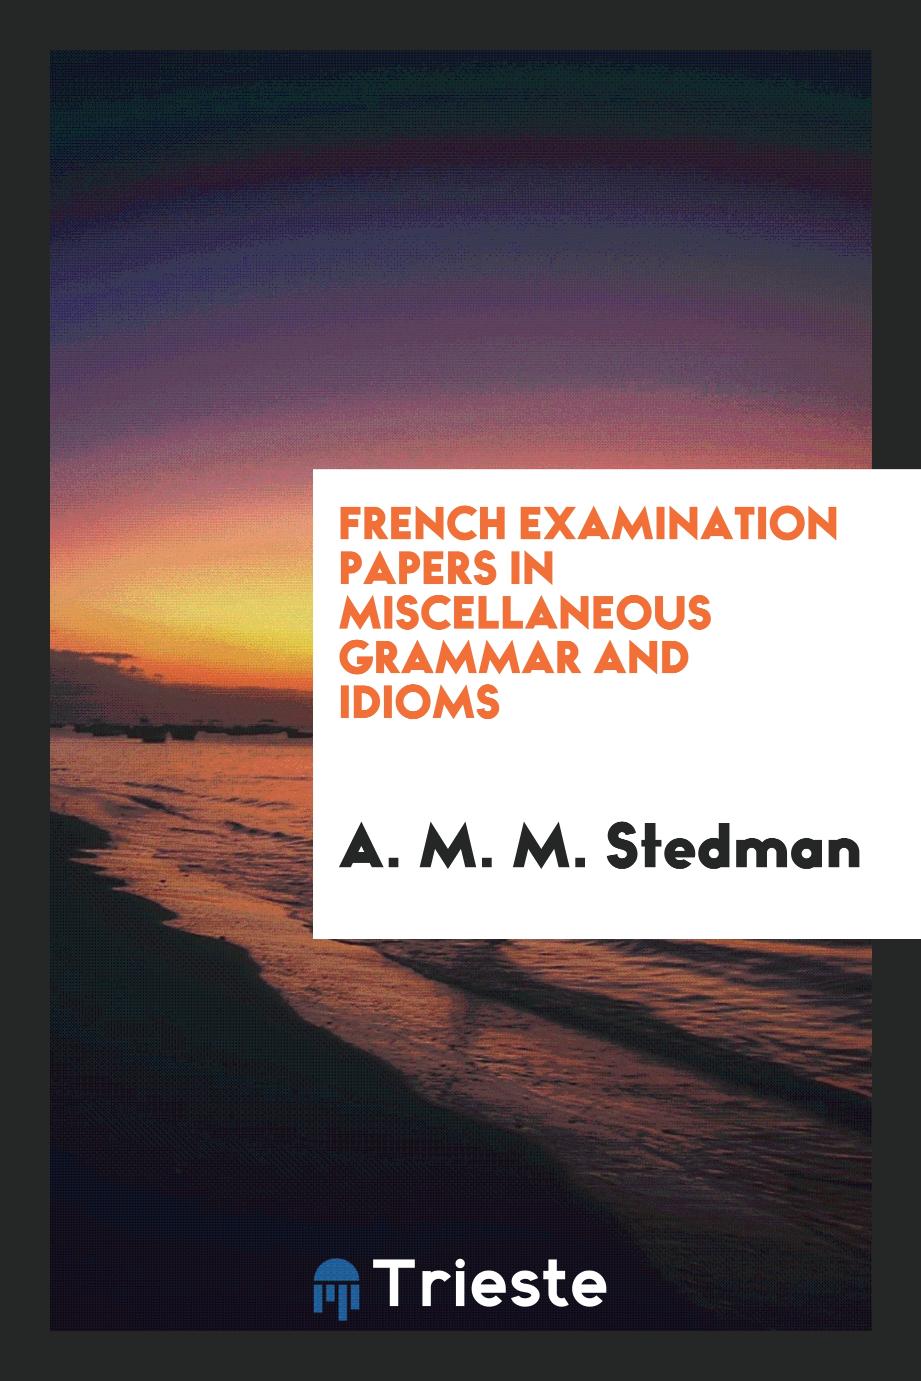 French Examination Papers in Miscellaneous Grammar and Idioms